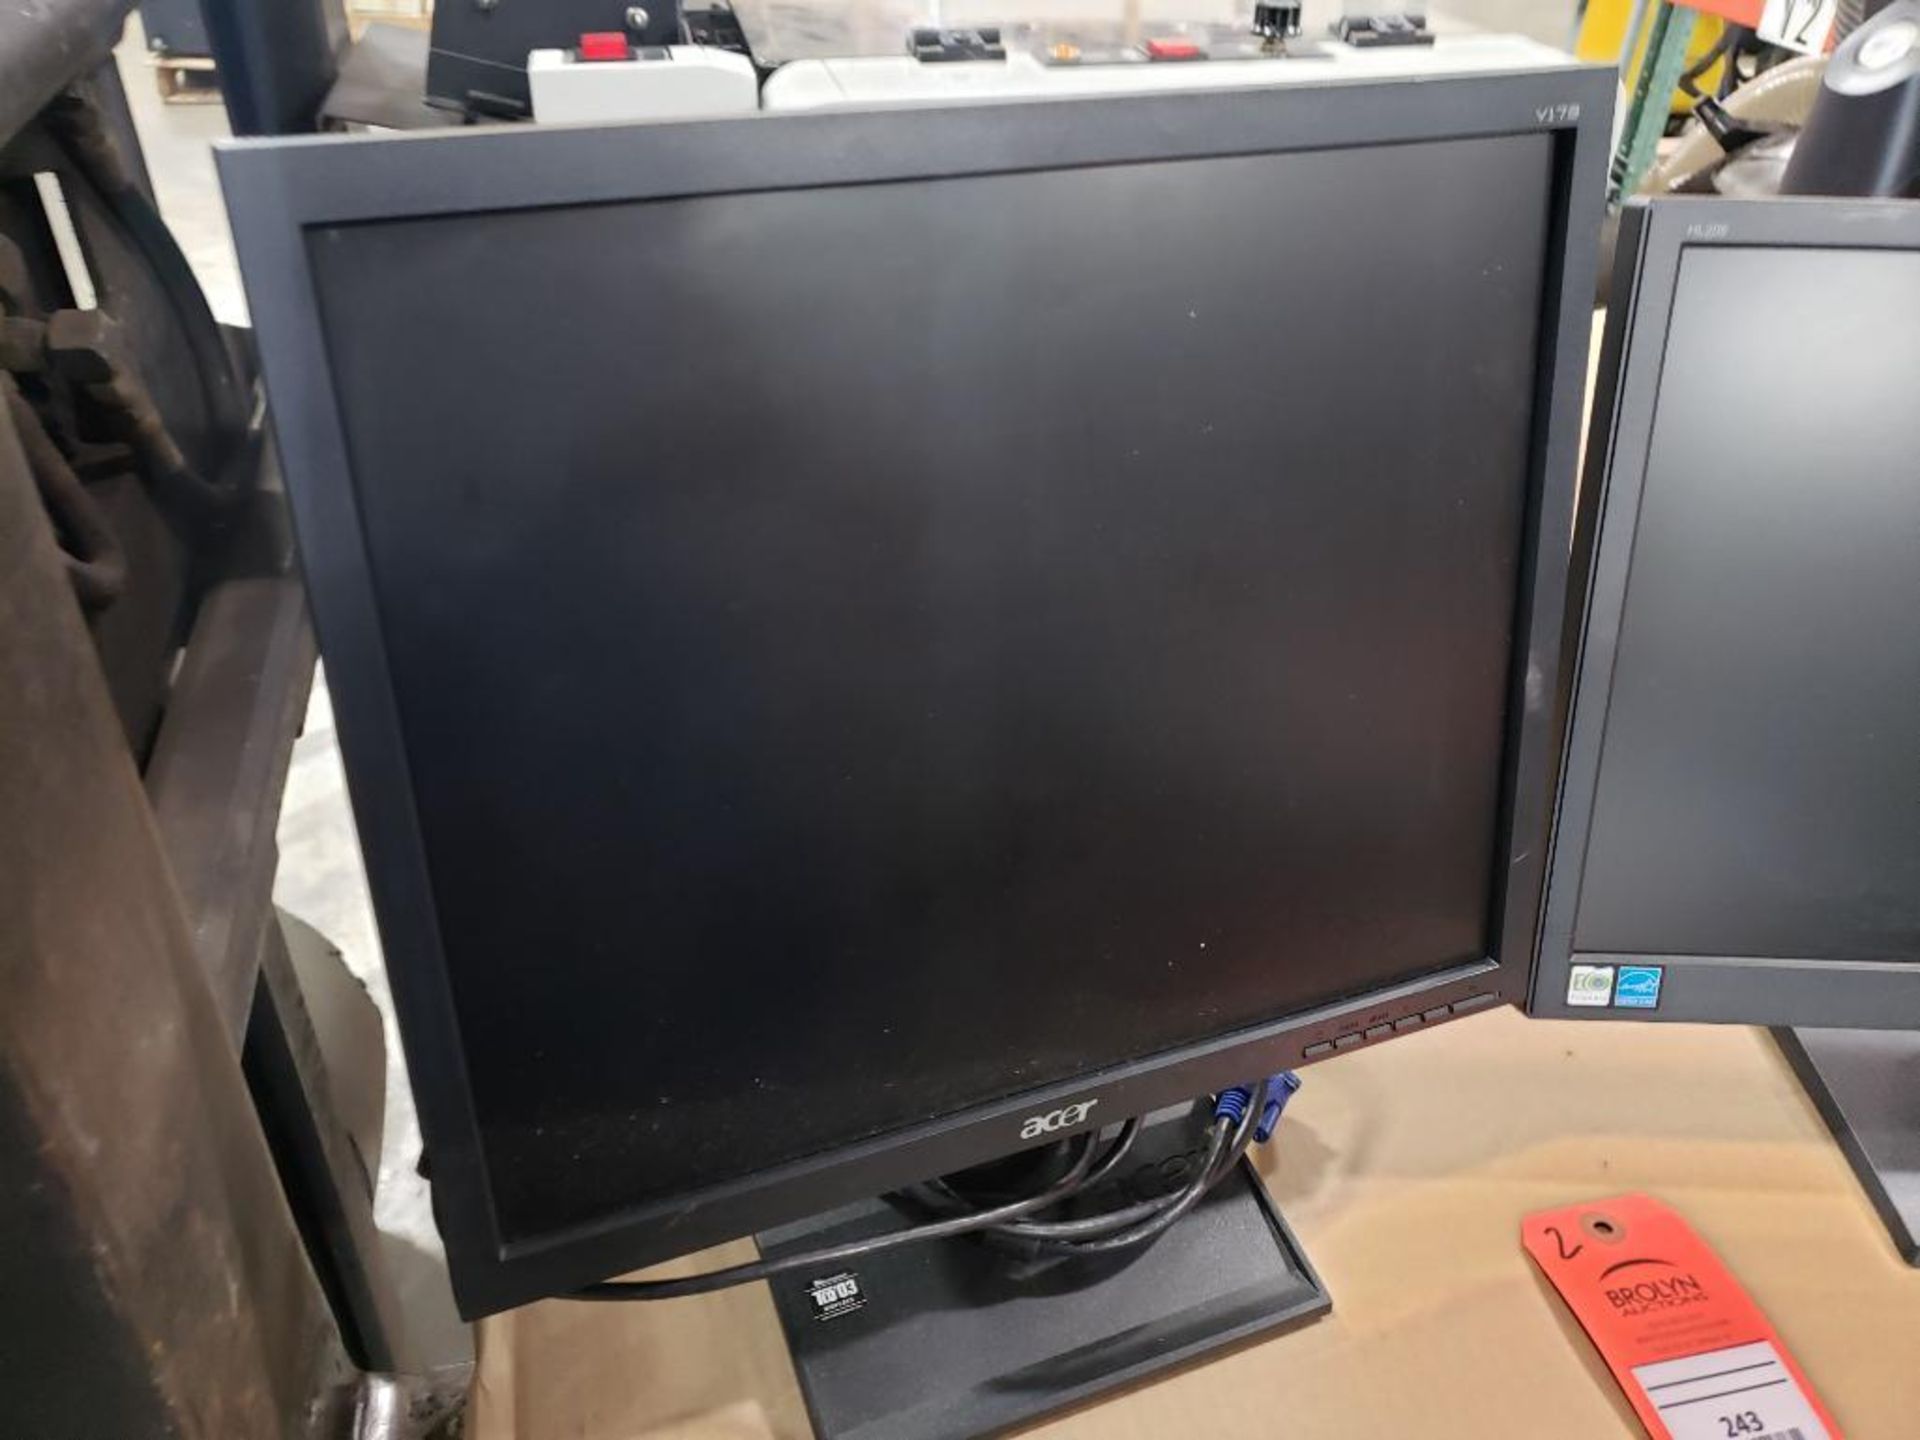 Qty 2 - Assorted PC monitors. ACER, HANNS-G. - Image 2 of 8